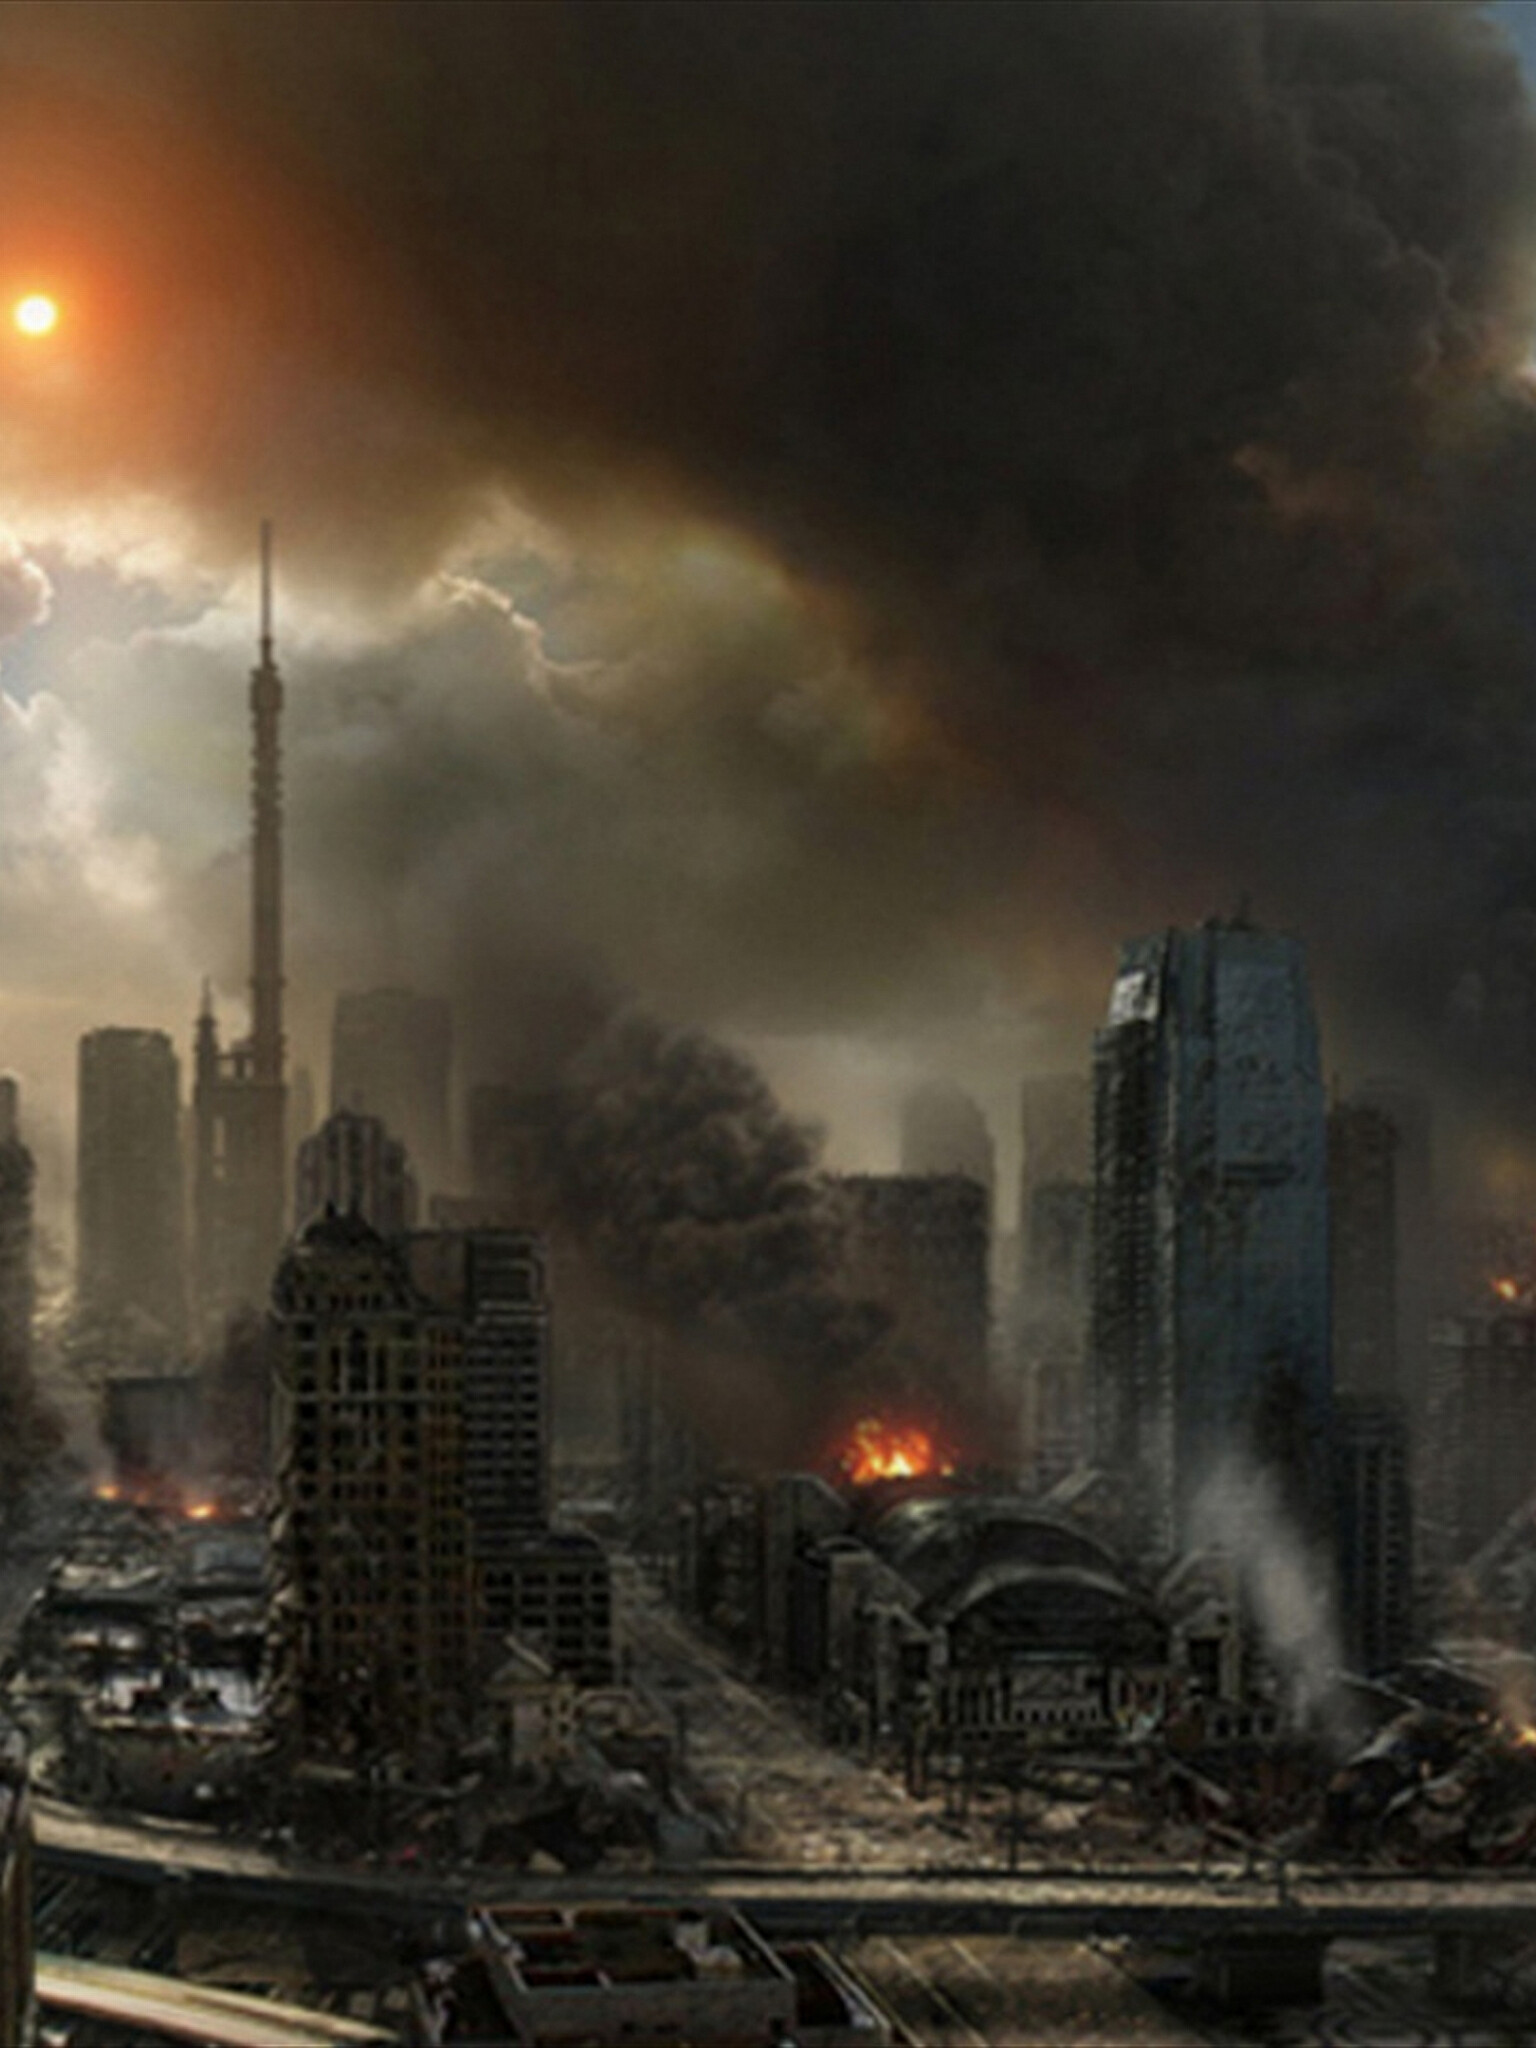 Post-apocalypse: Doomsday, Destroying the world, Decay. 1540x2050 HD Wallpaper.